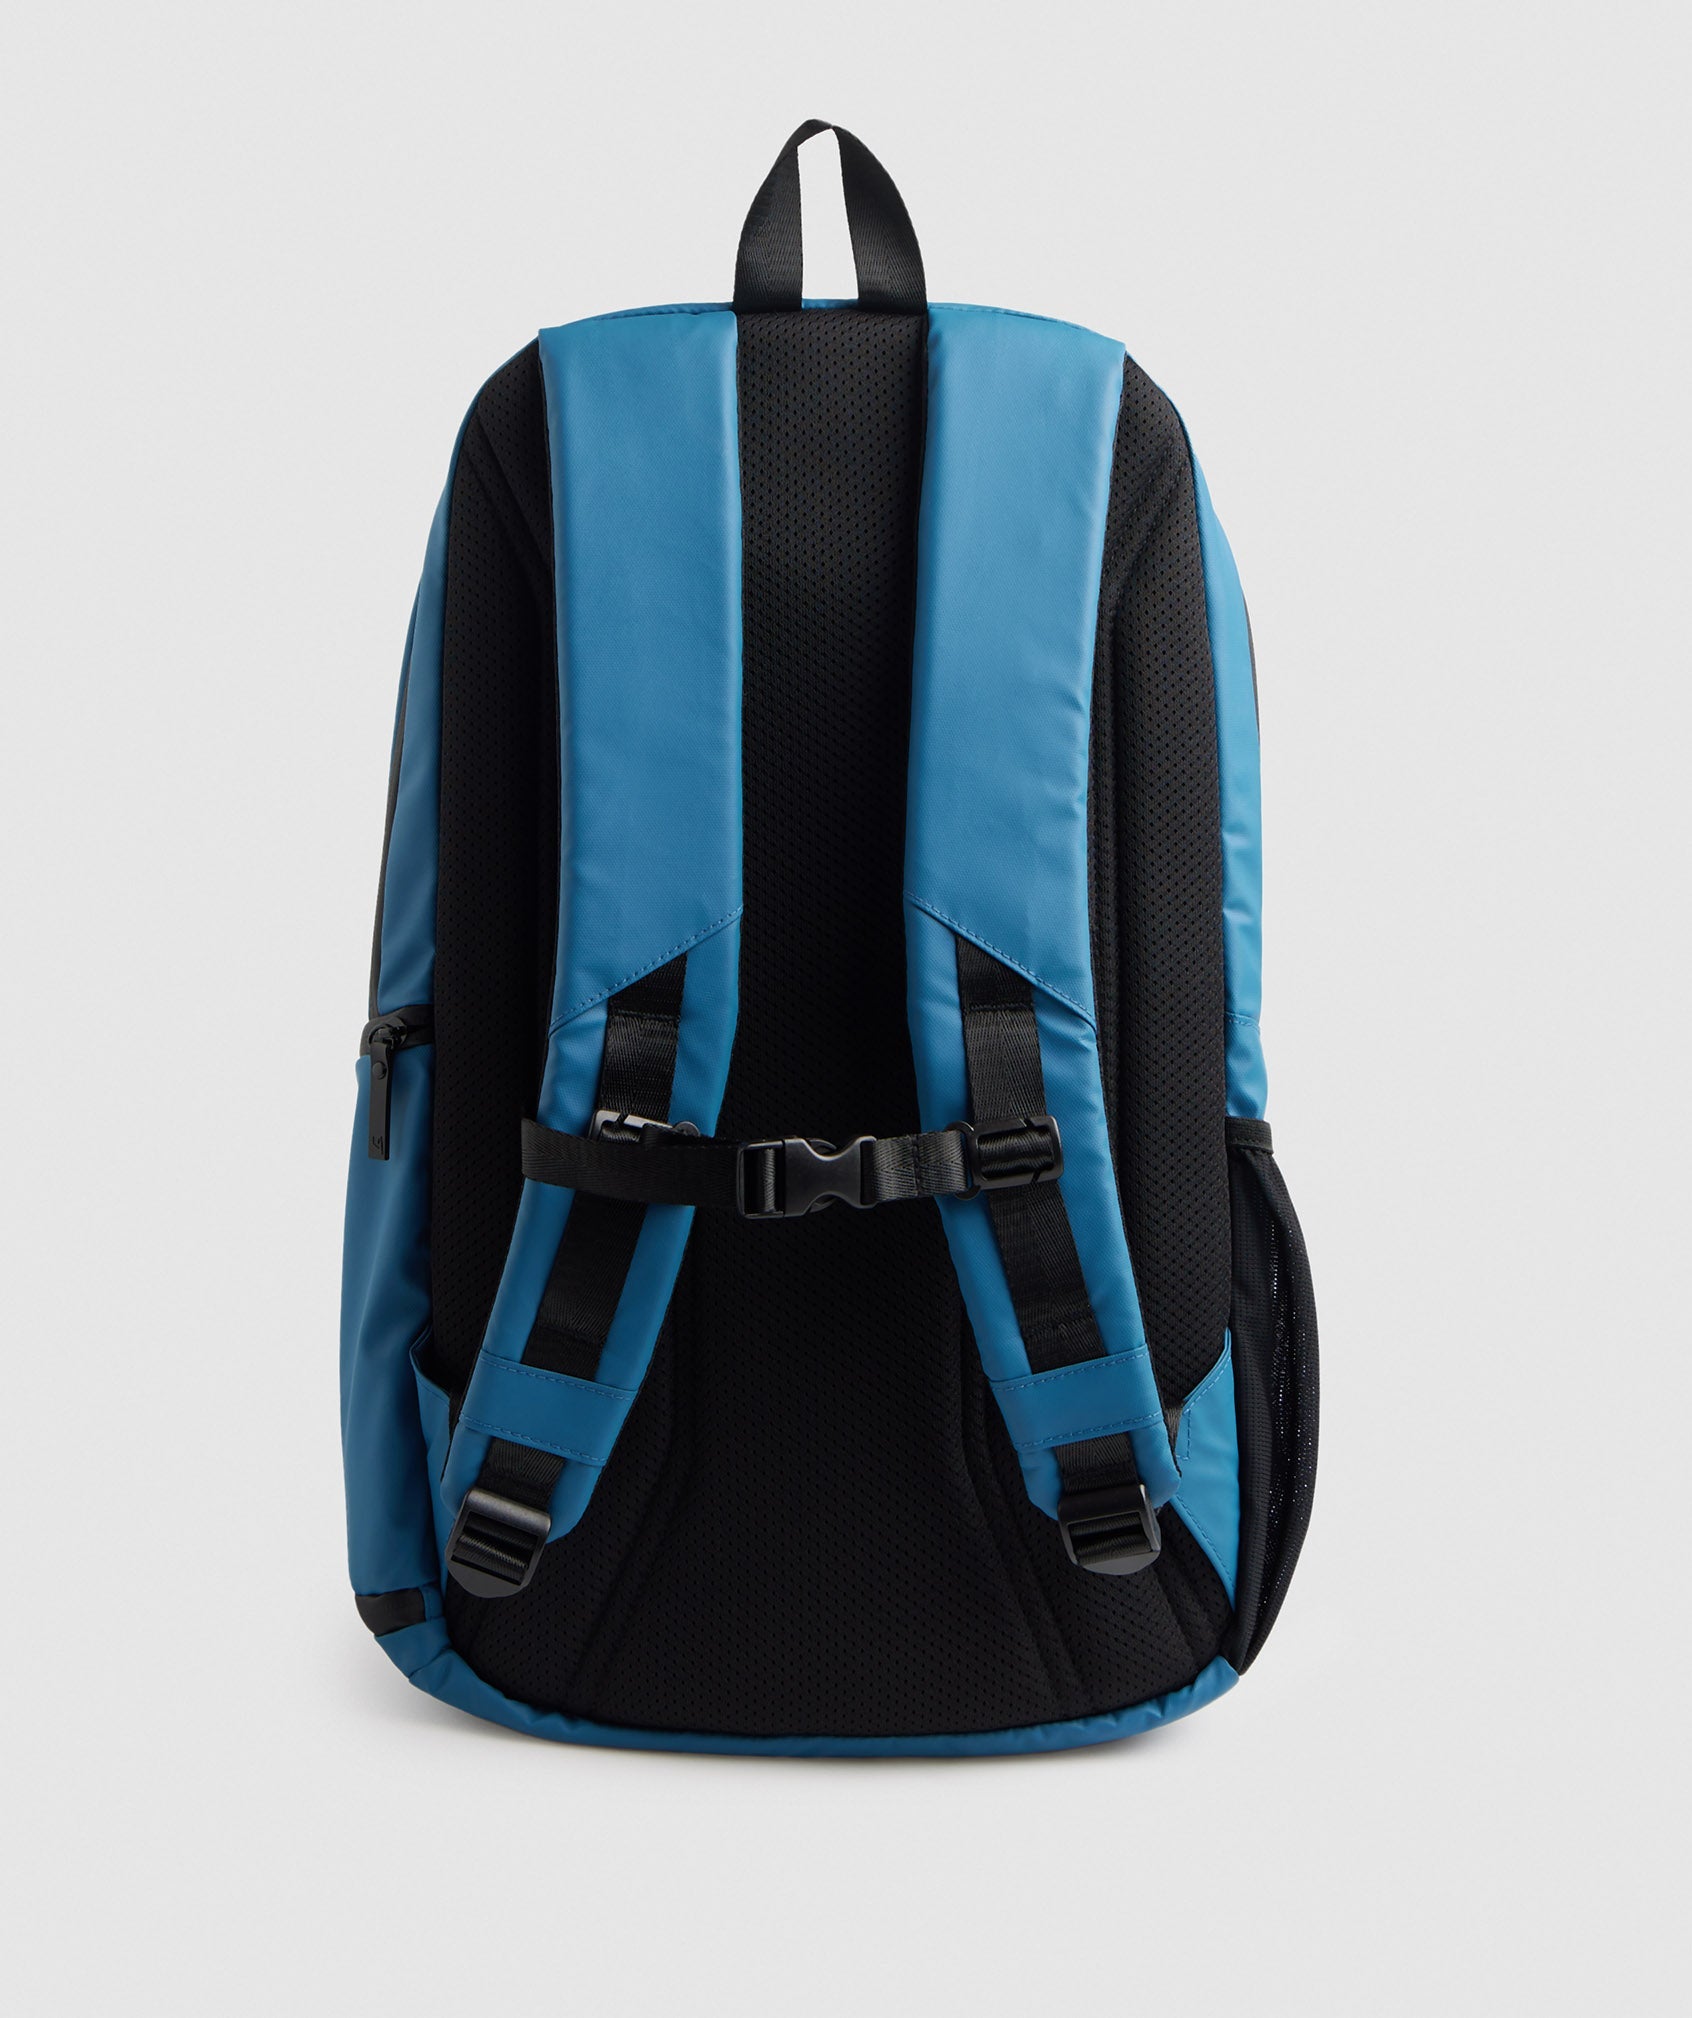 X-Series 0.1 Backpack in Lakeside Blue - view 2